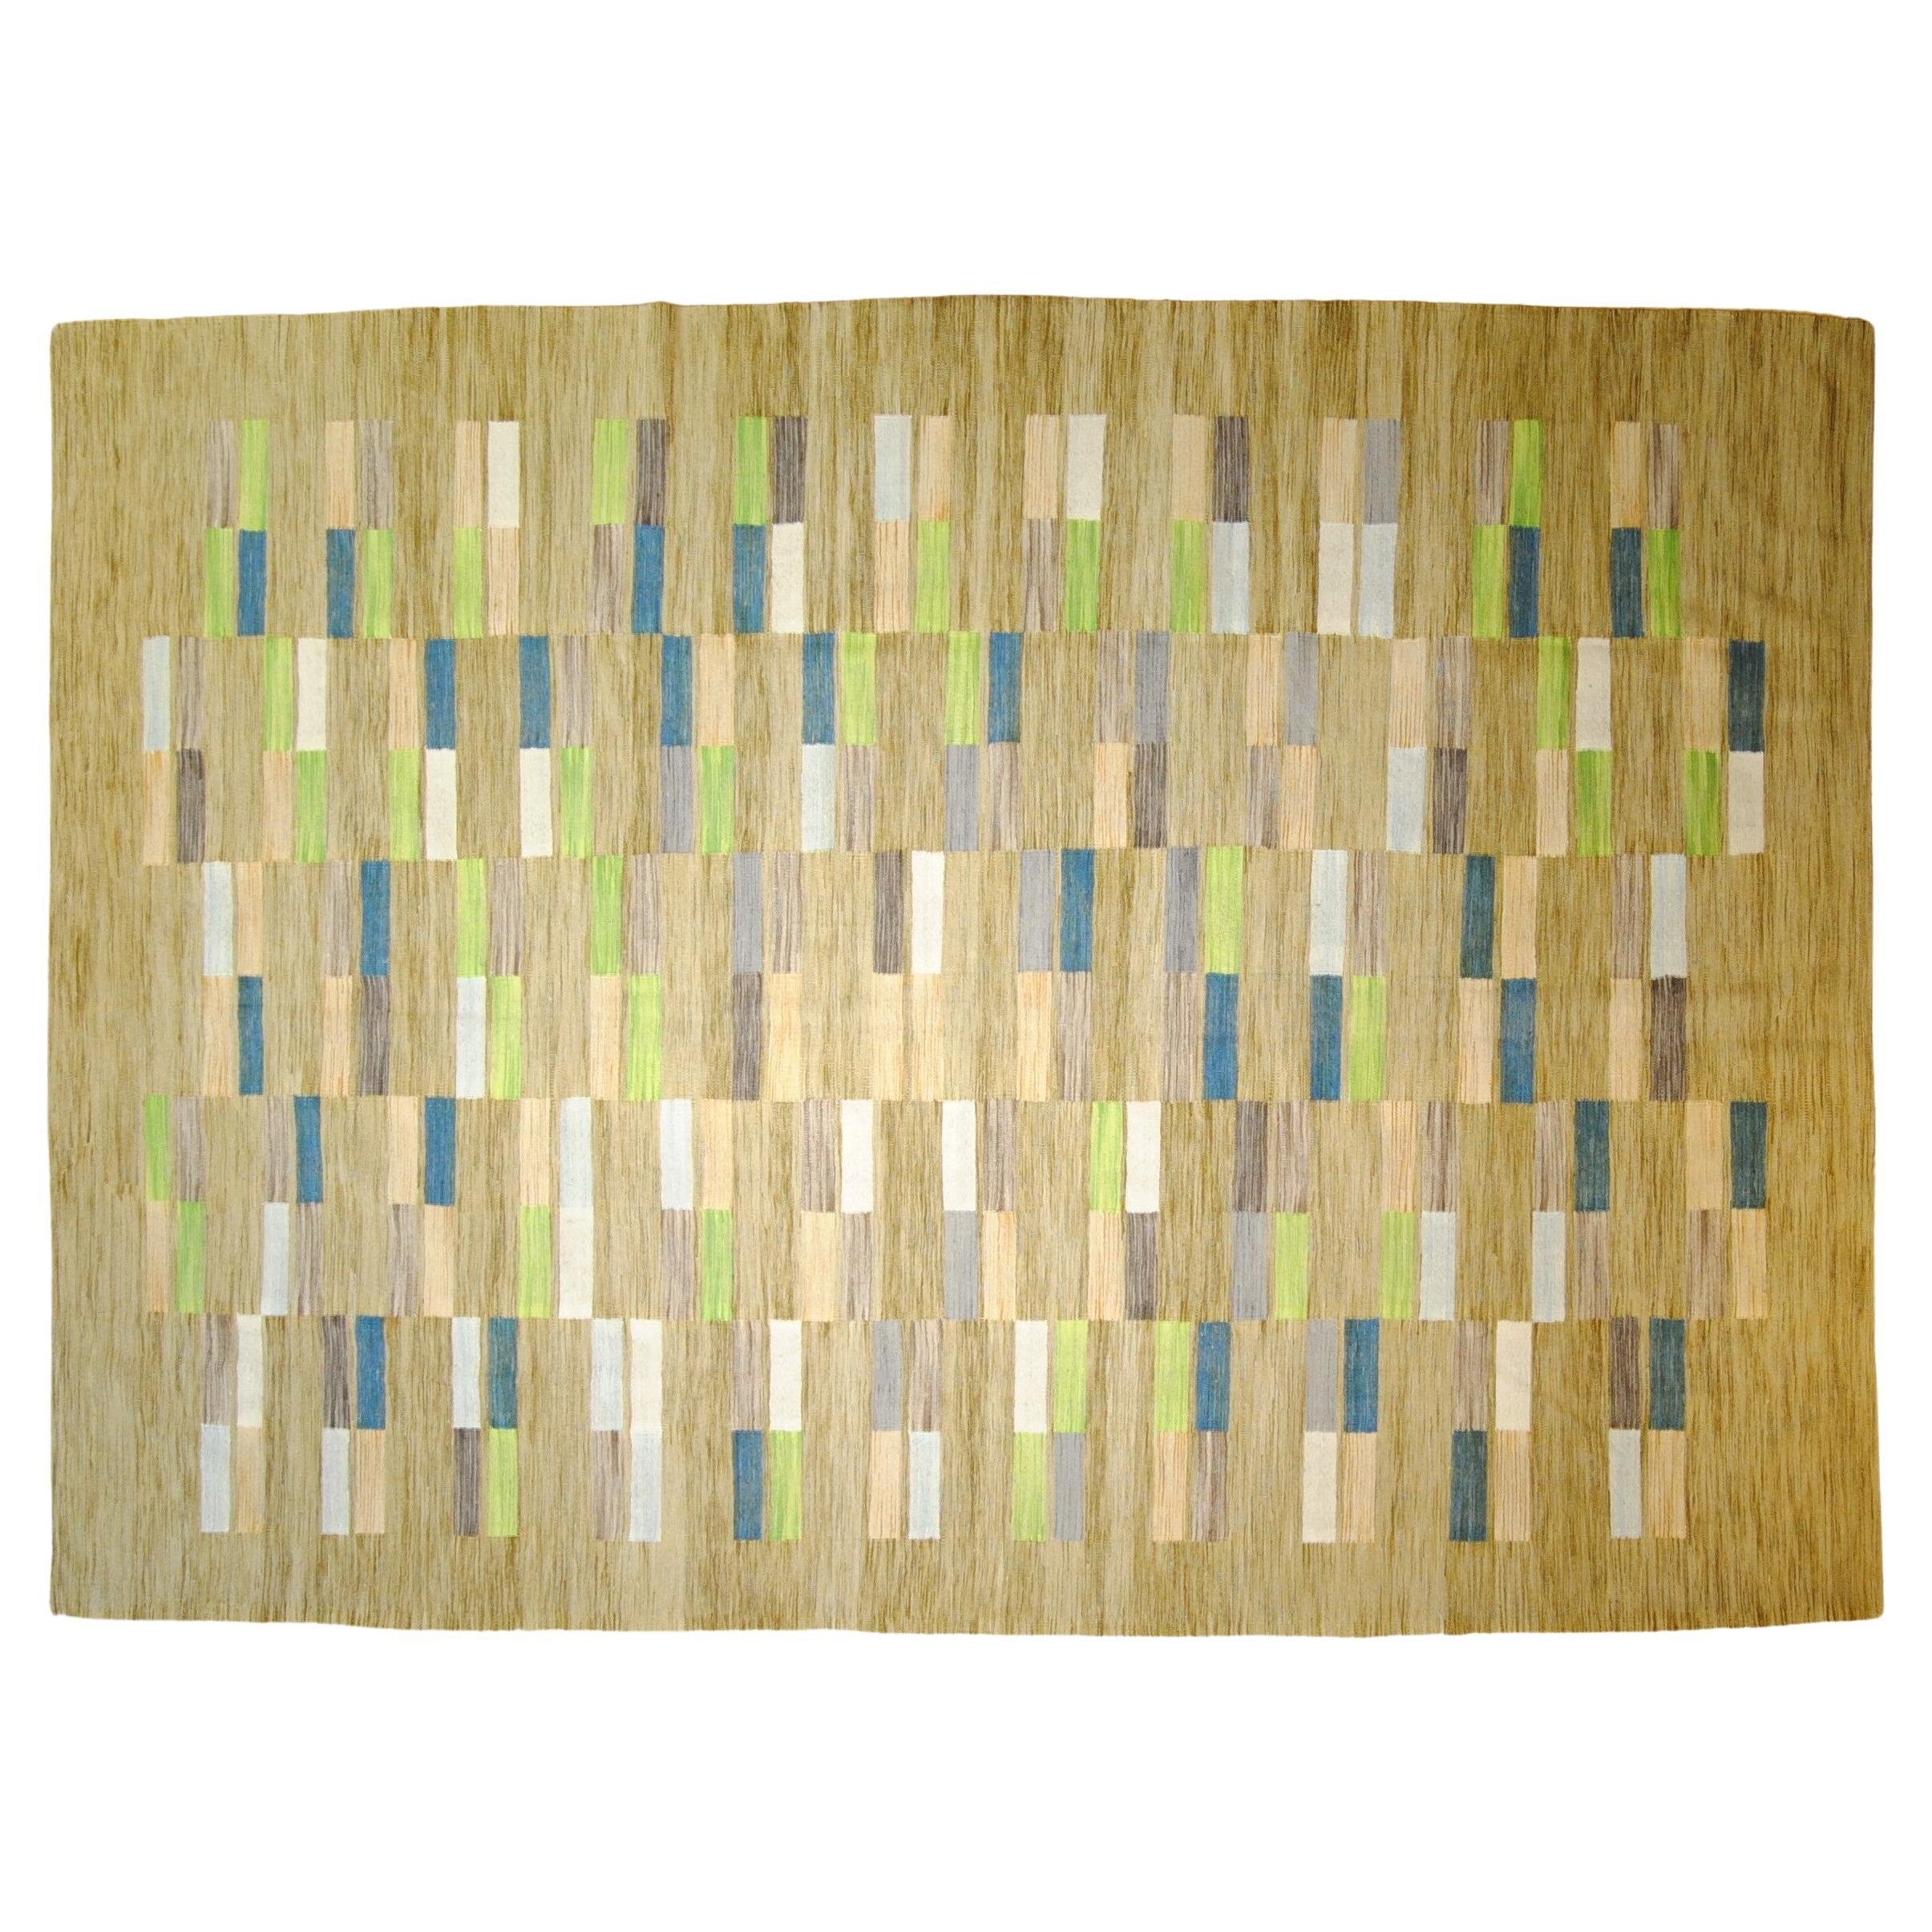 Woven flatweave rug in 1970s style vibrant colors begie blue green For Sale